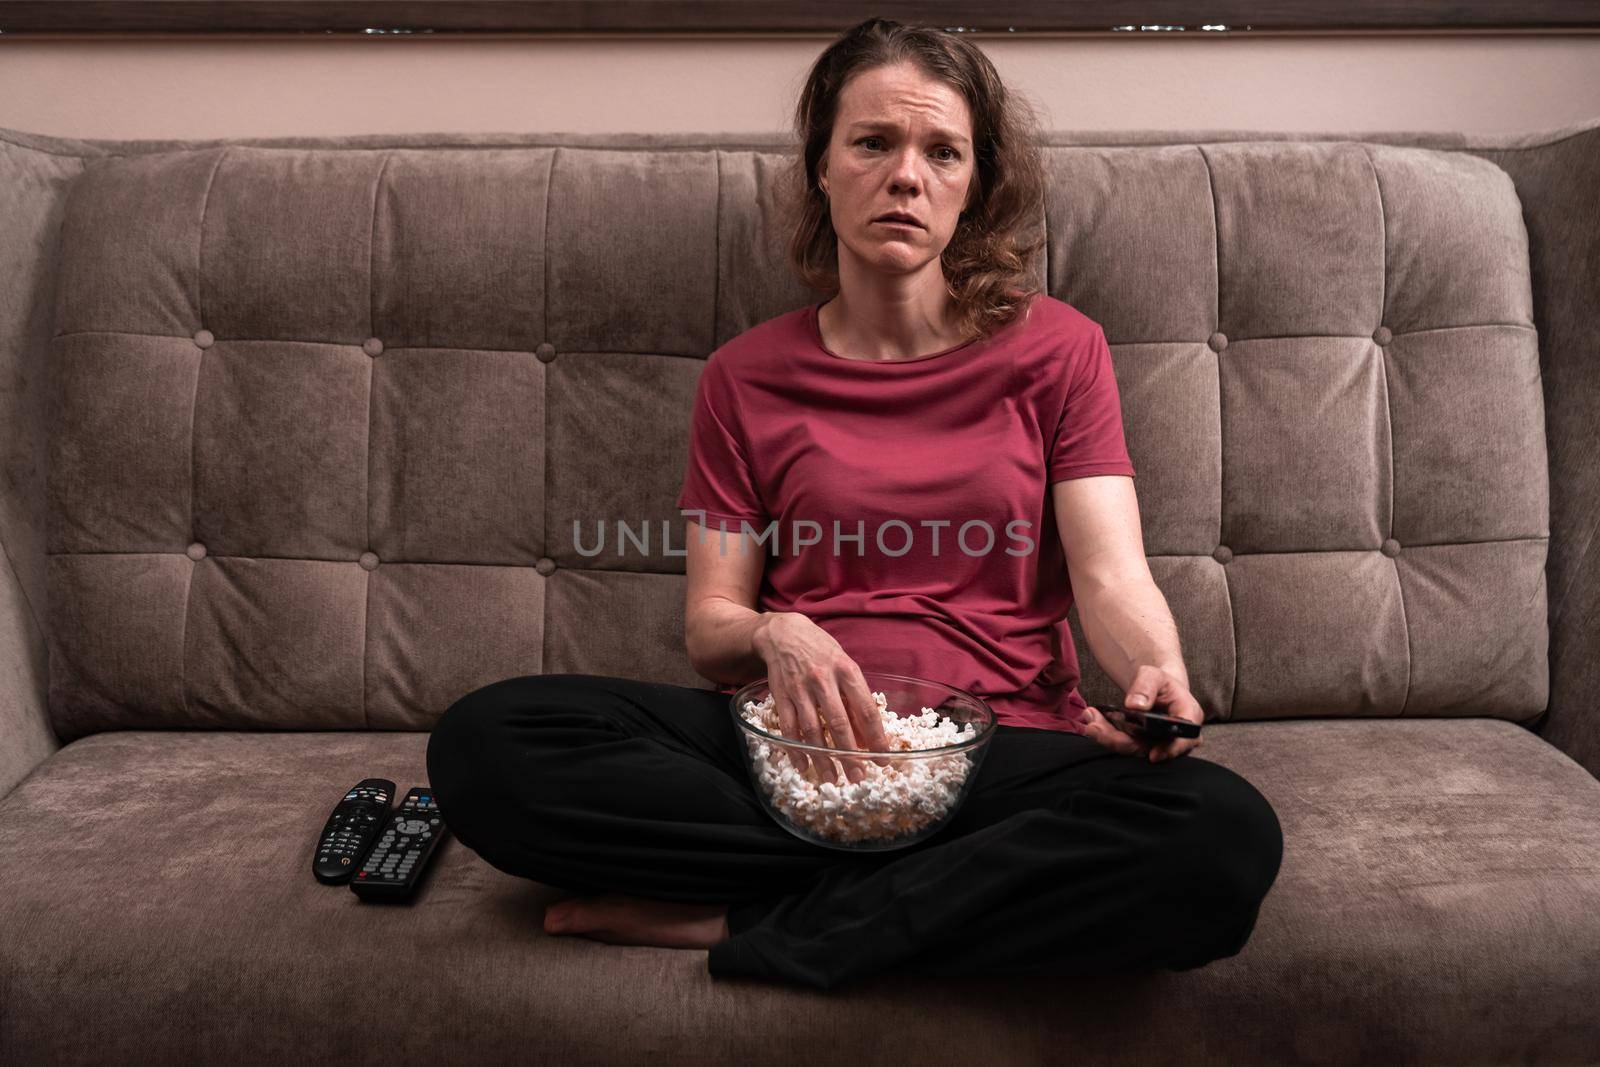 emotions when watching TV at home with popcorn. sadness and compassion by Edophoto